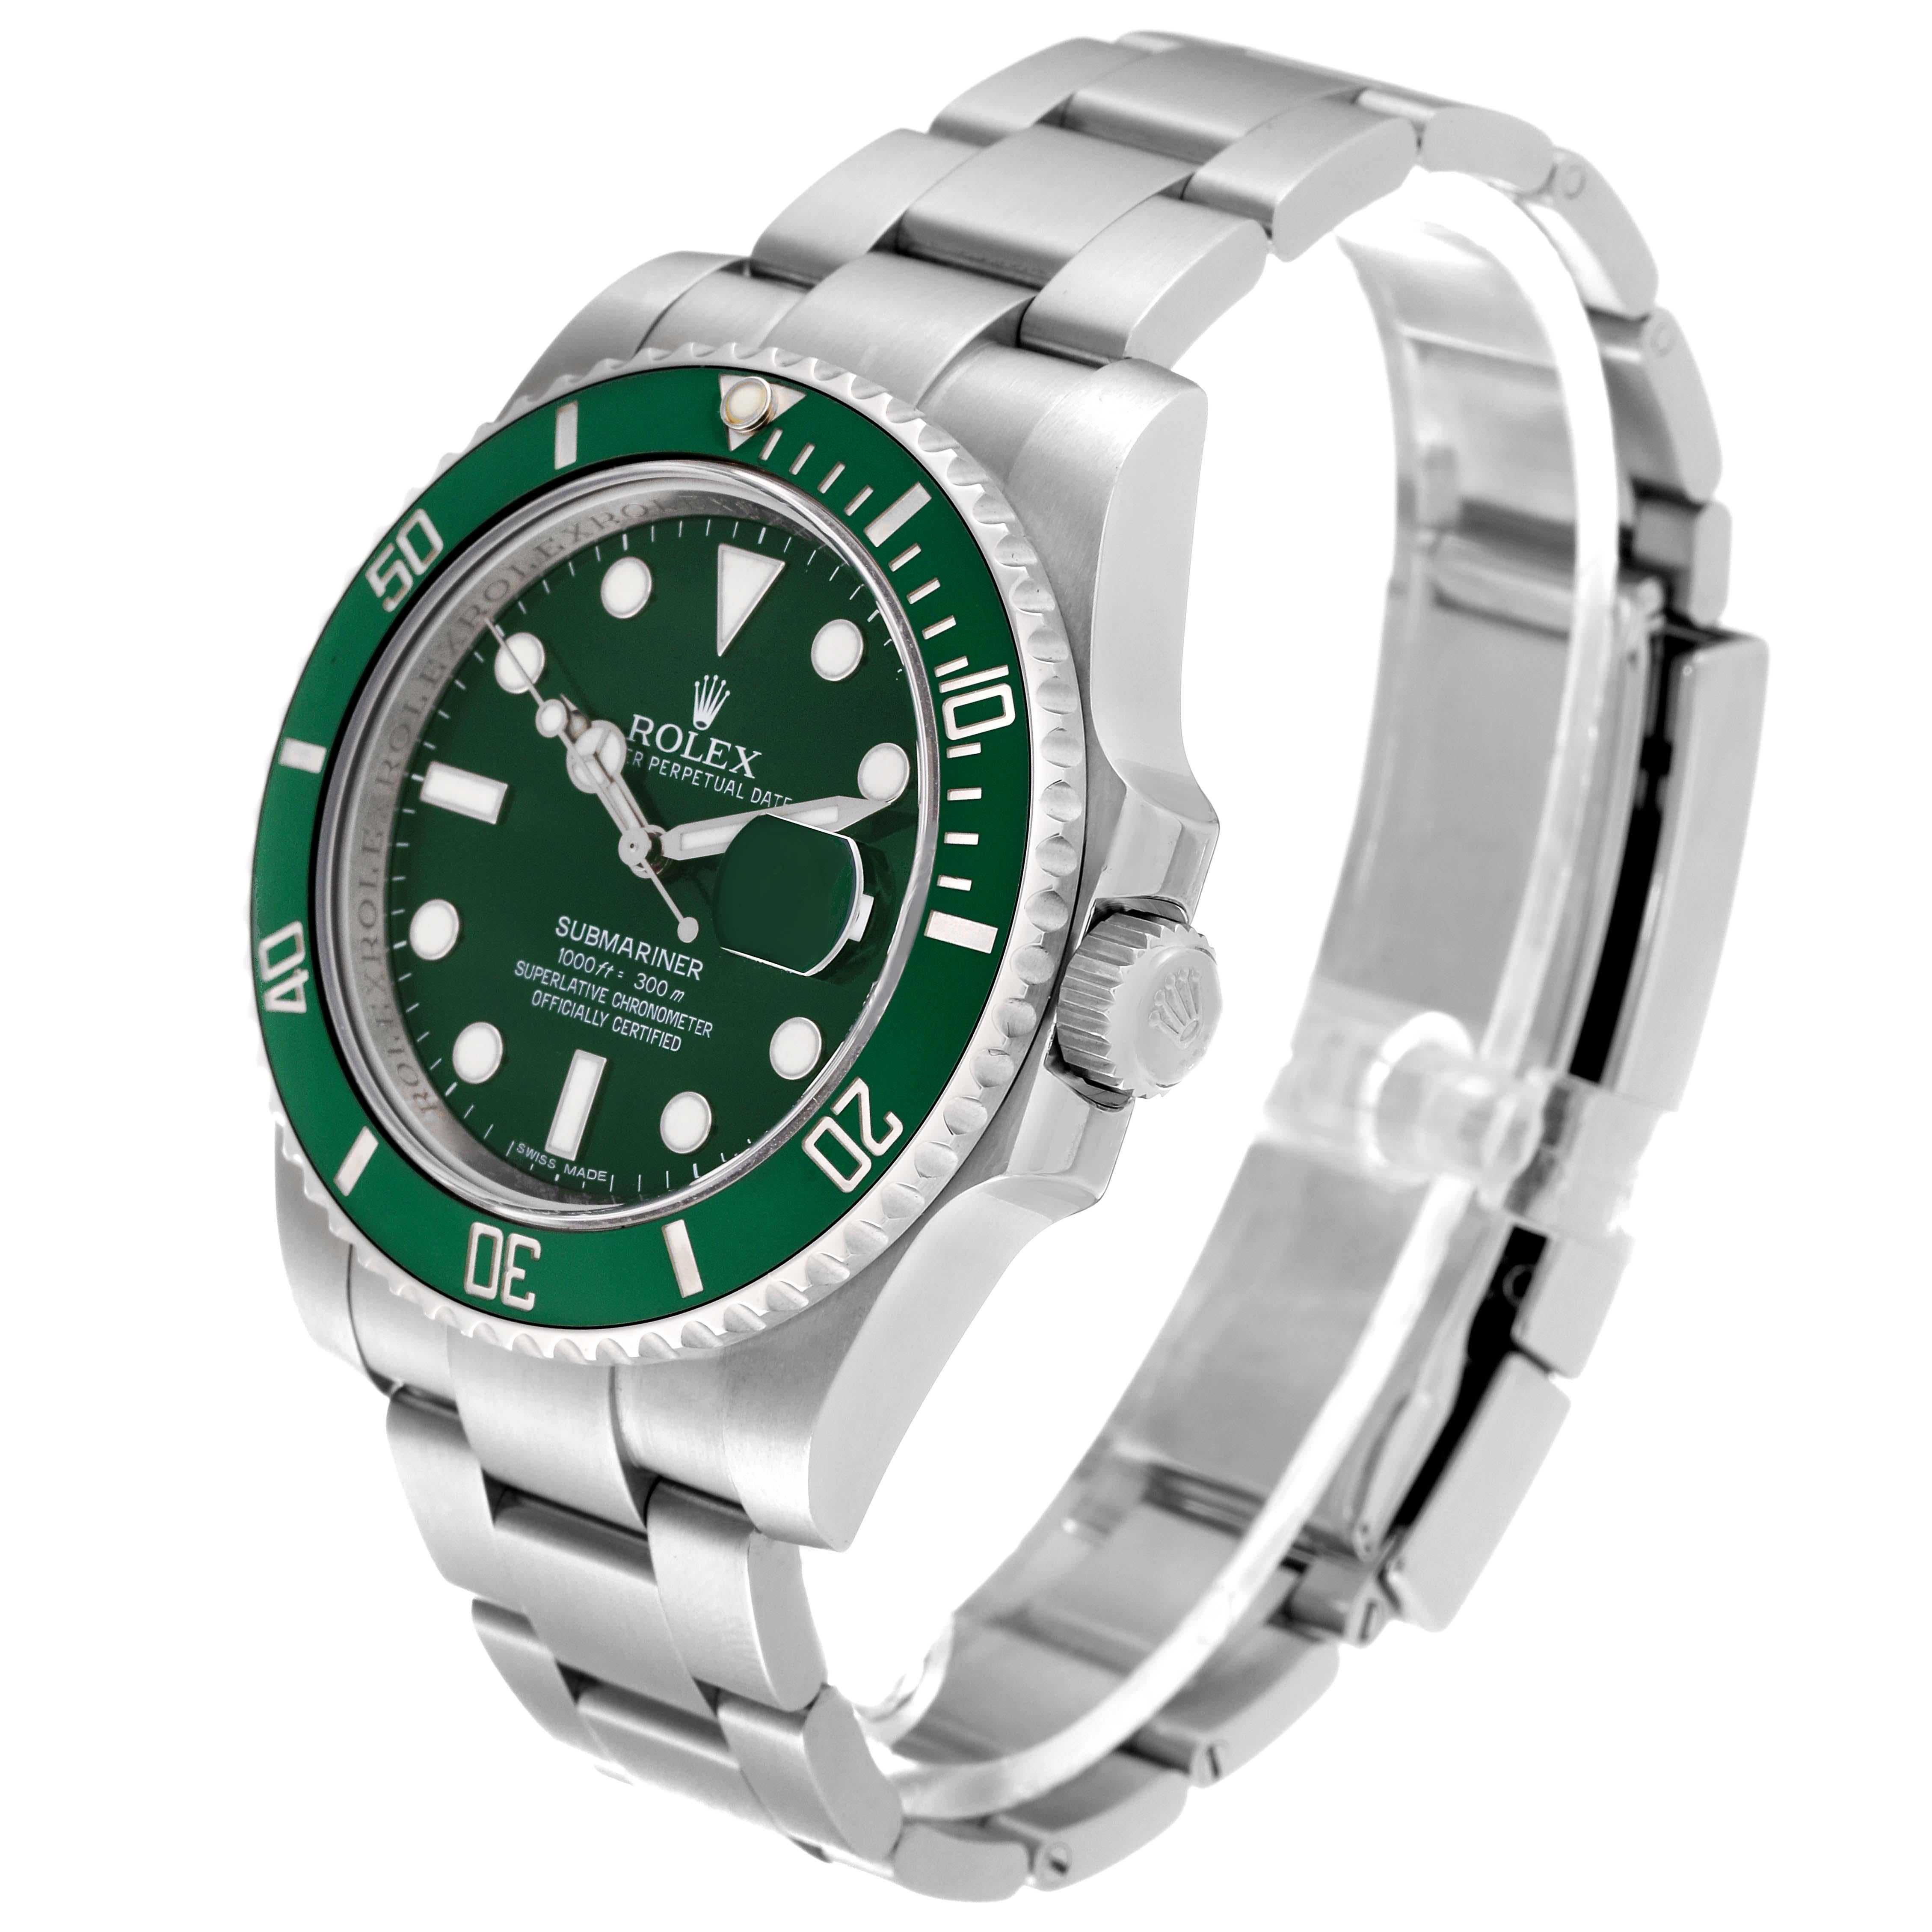 Rolex Submariner Hulk Green Dial Steel Mens Watch 116610LV Box Card For Sale 2